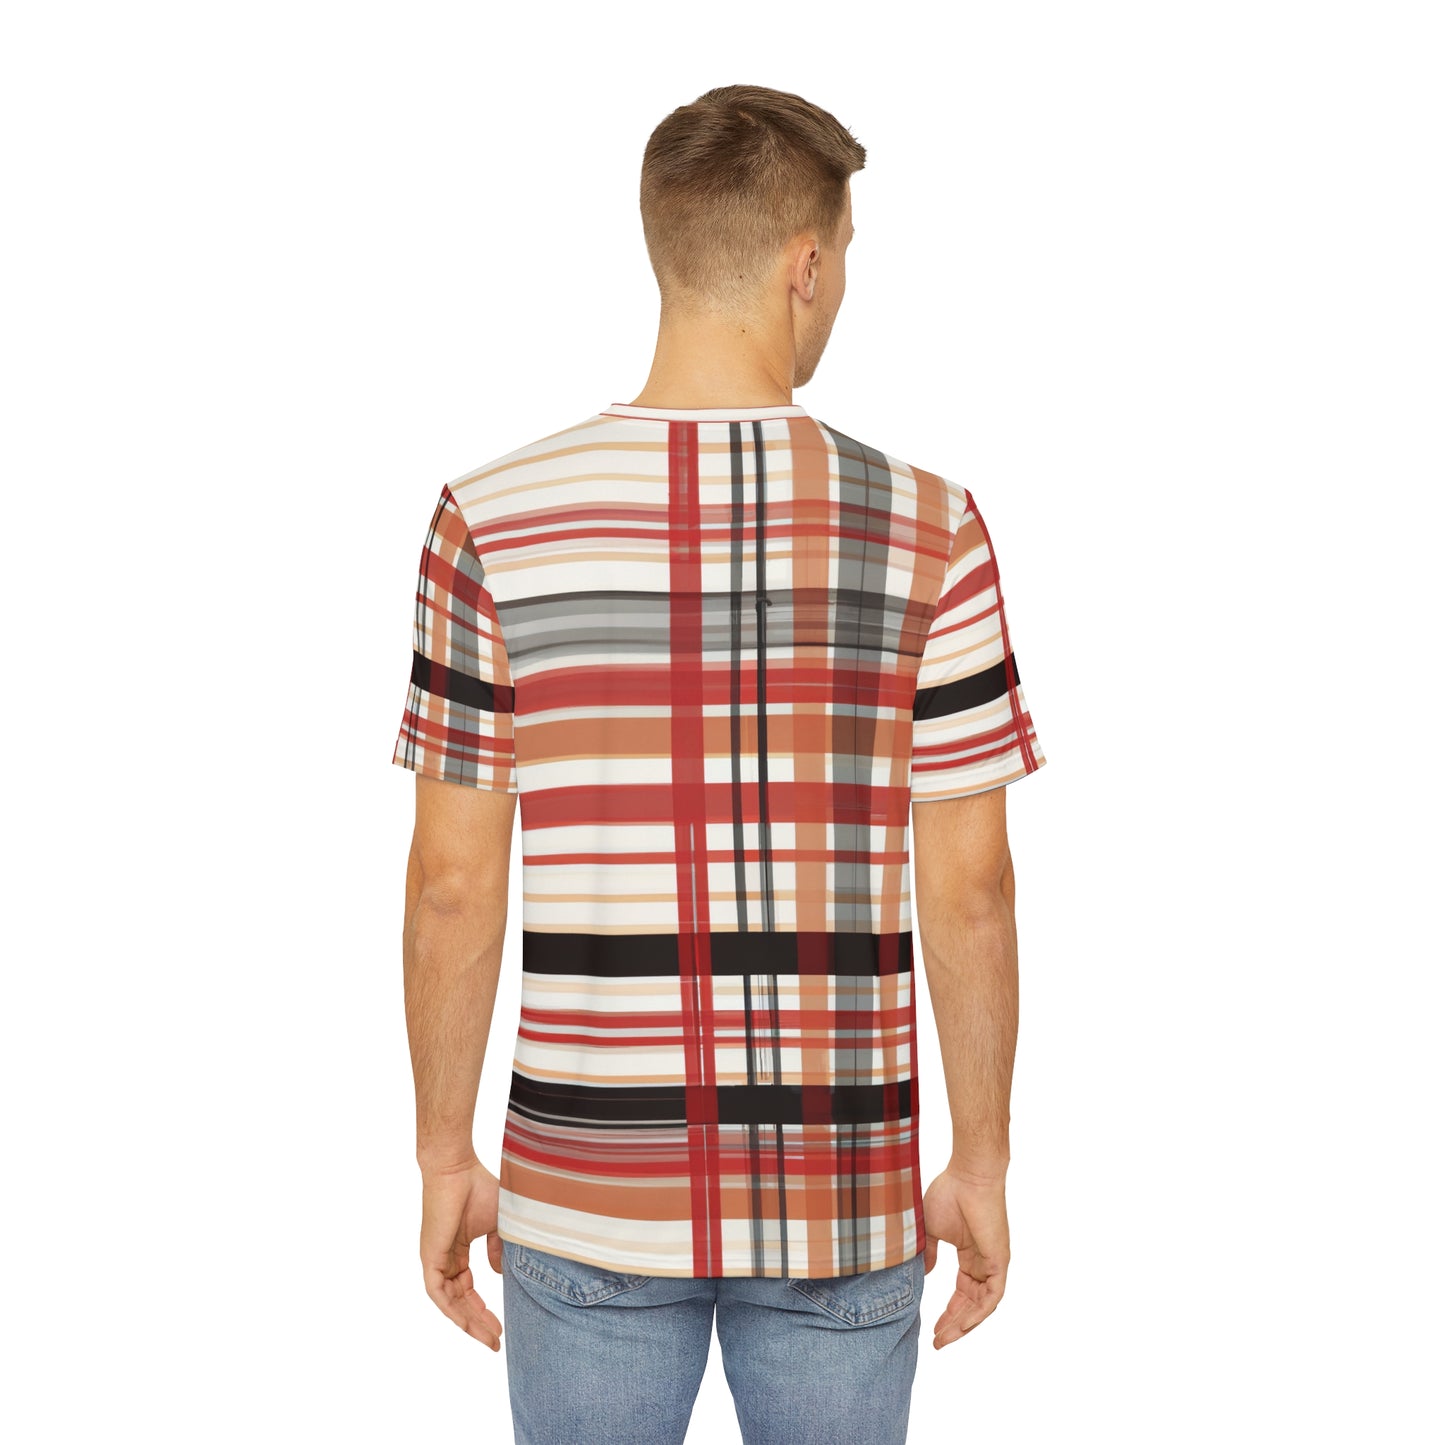 Back view of the Maestro Kaleidoscope Crewneck Pullover All-Over Print Short-Sleeved Shirt black red white plaid pattern paired with casual denim pants worn by white man